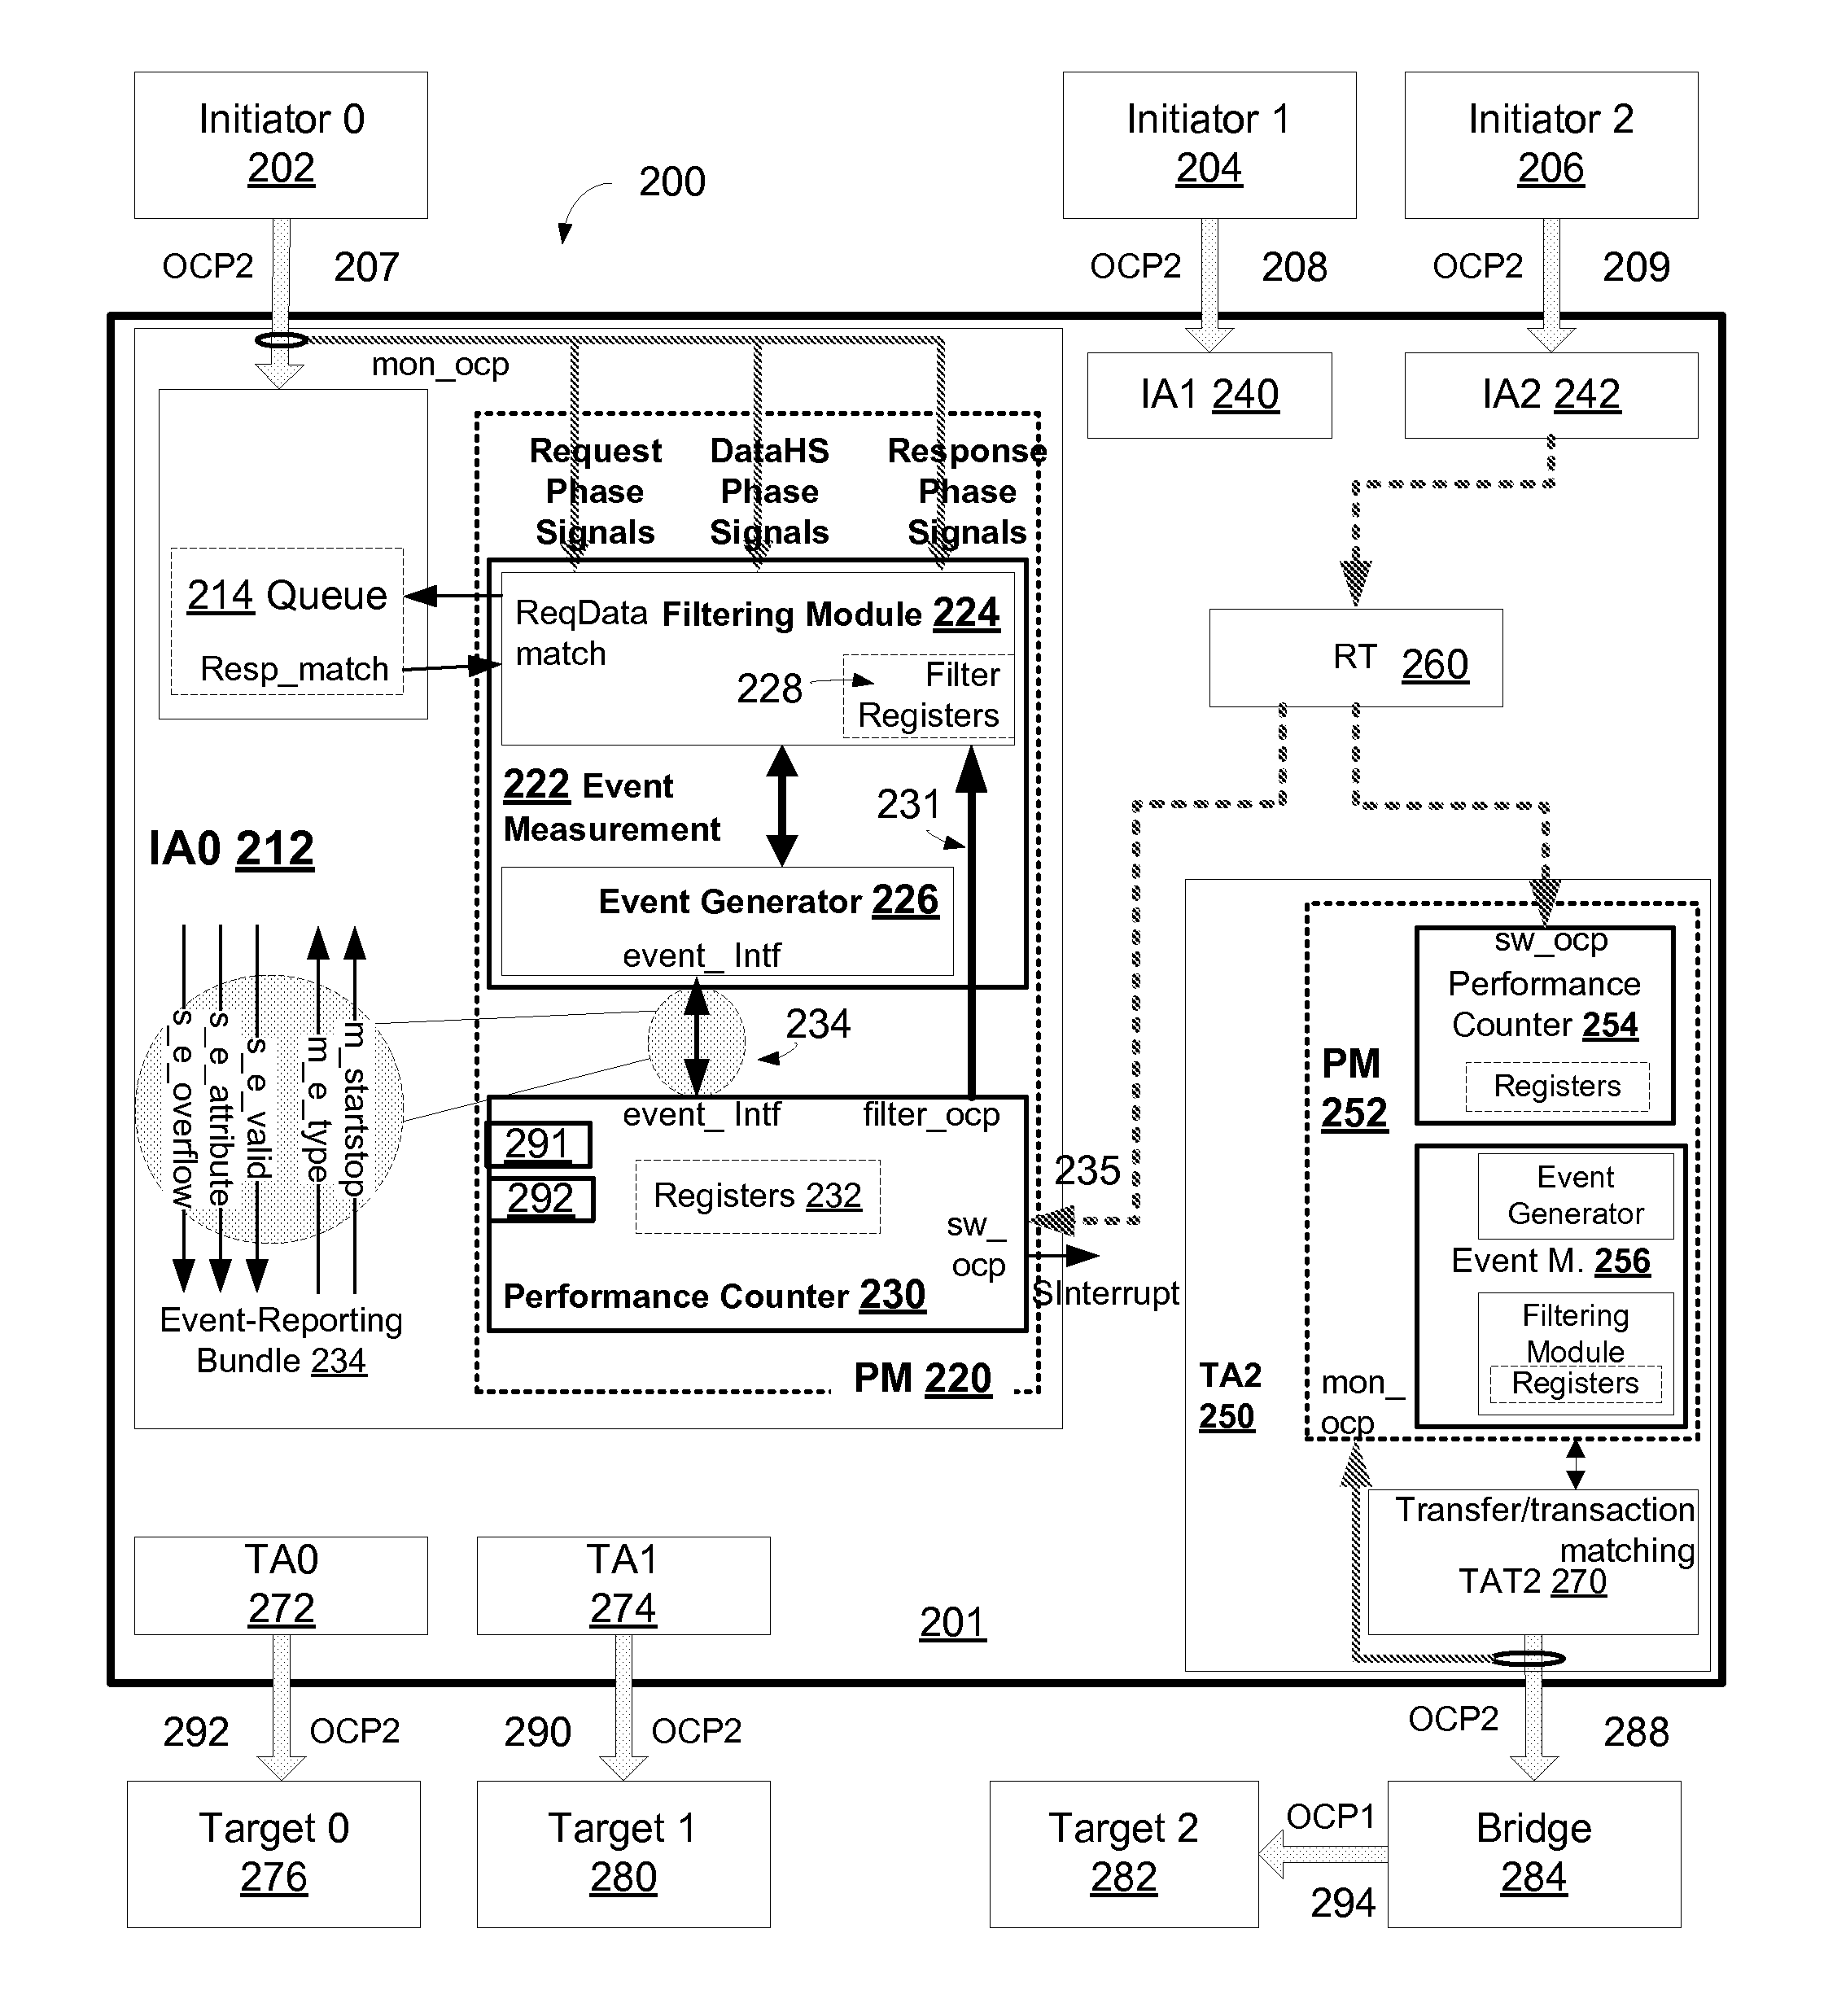 Method and system to monitor, debug, and analyze performance of an electronic design